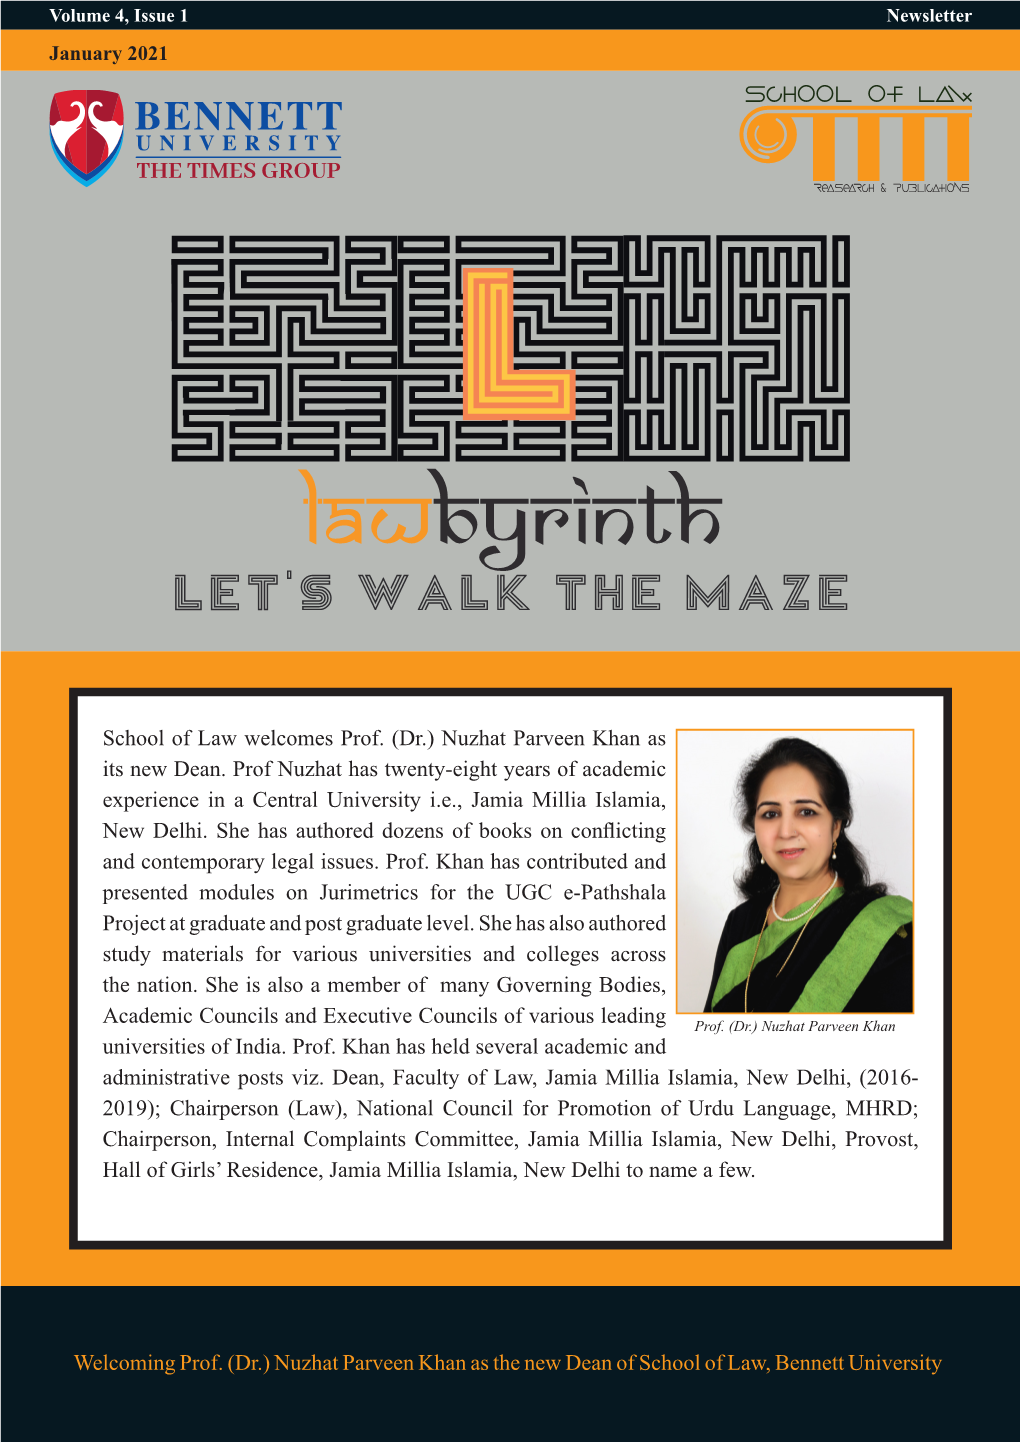 School of Law Welcomes Prof. (Dr.) Nuzhat Parveen Khan As Its New Dean